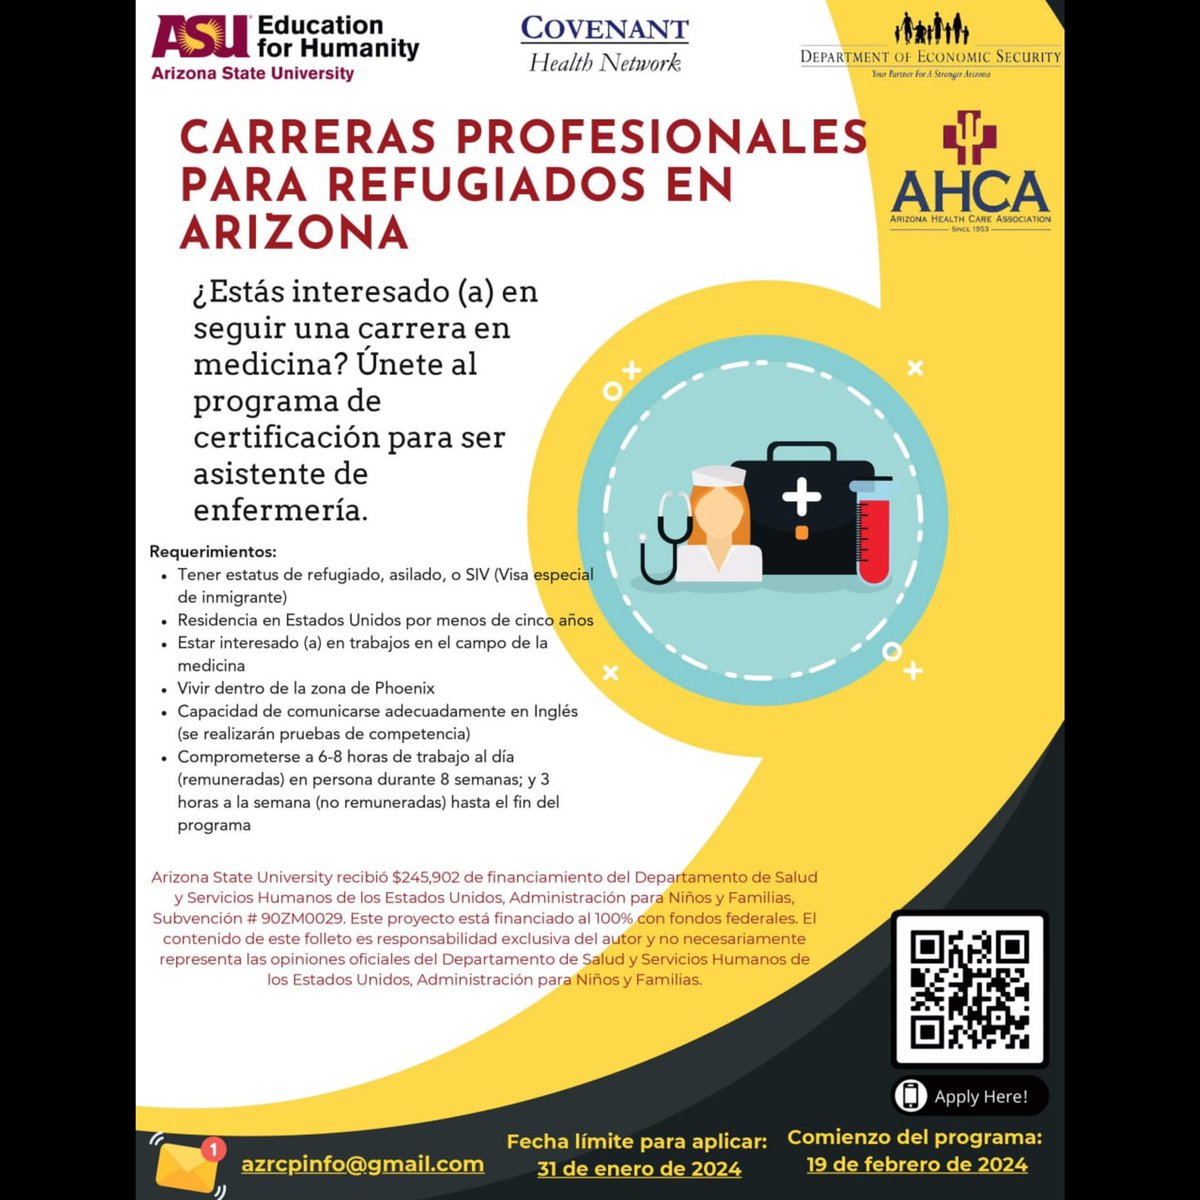 If you are a #refugee in Arizona and are interested in pursuing a career in the medical field, join the Certified Nursing Assistant (CNA) program. Apply by scanning the provided barcode before January 31, 2024. #refugeesupport #ASUeducationForHumanity #ASUforRefugees #azrcp